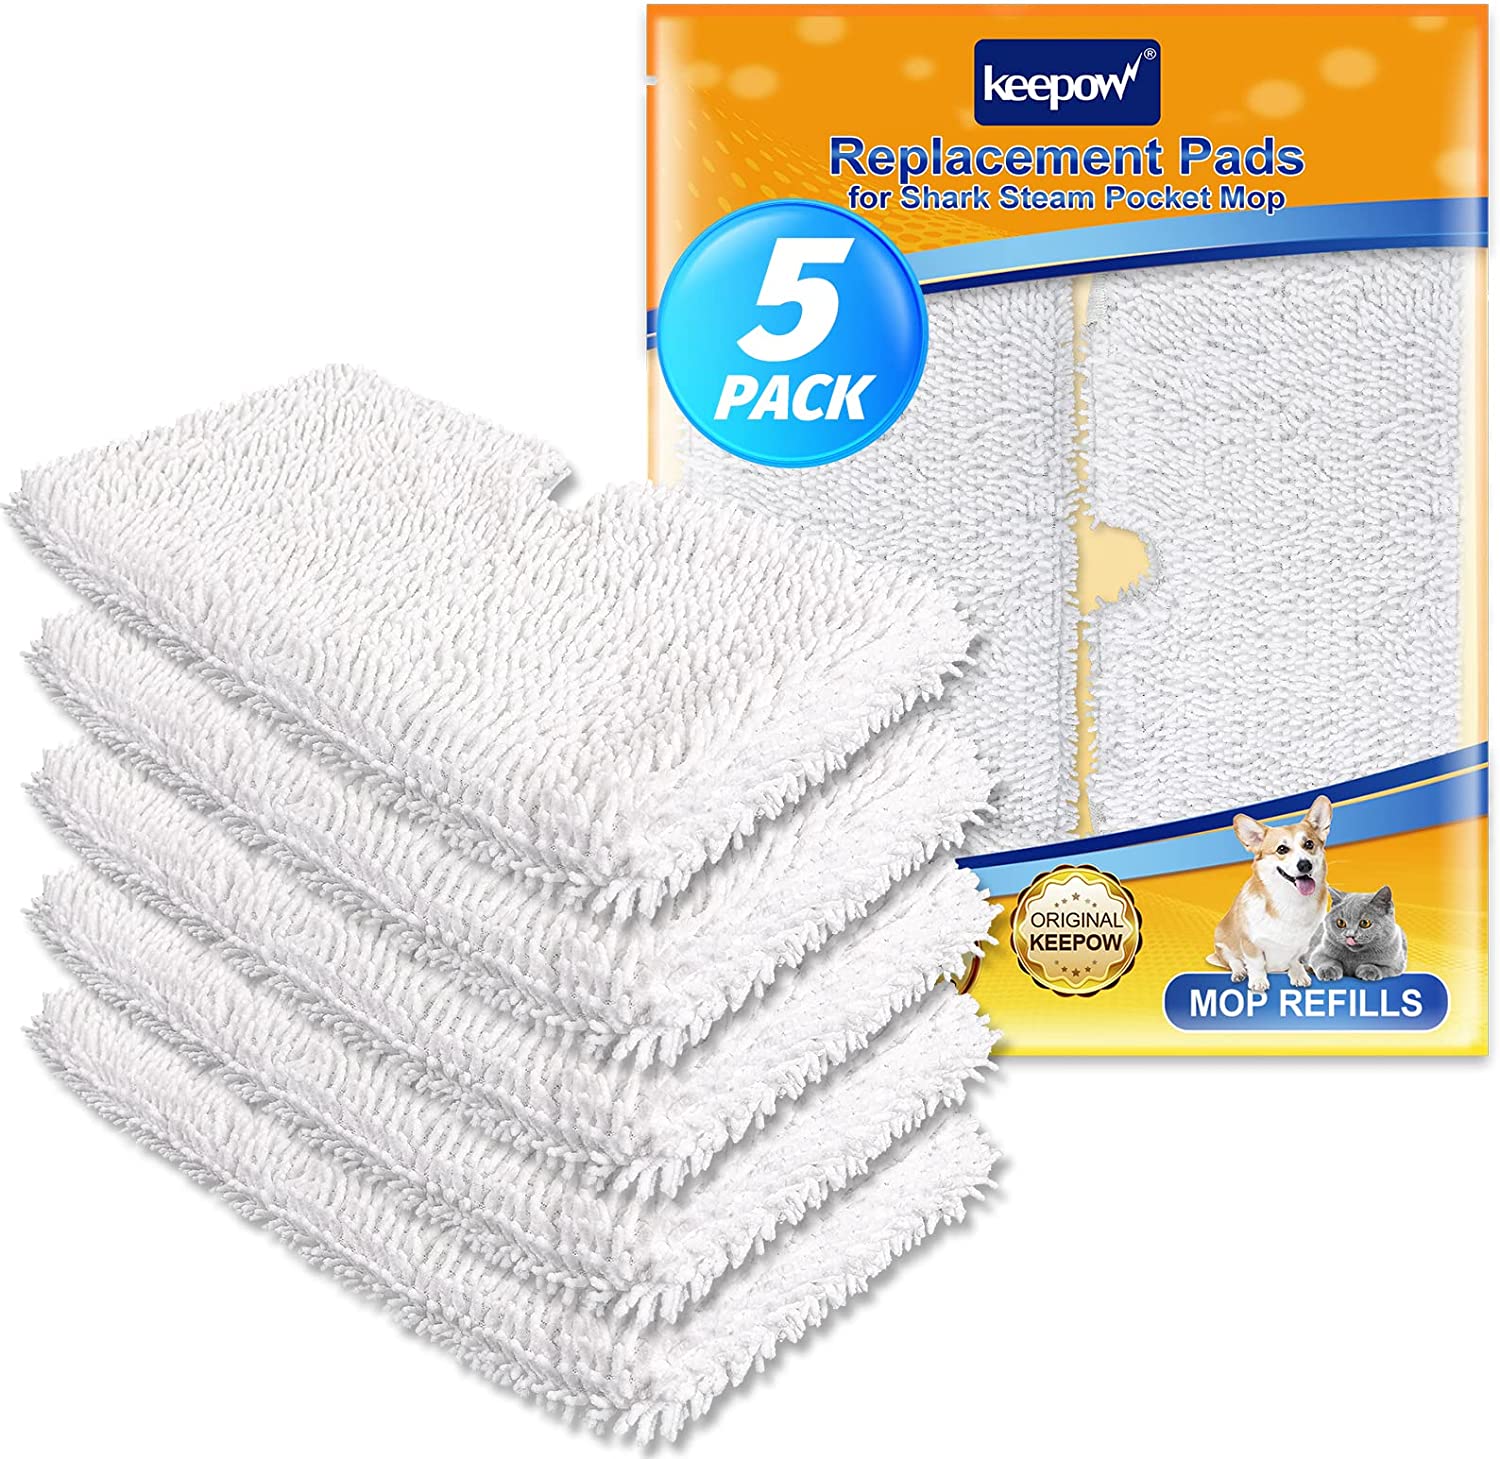 KEEPOW Steam Mop Replacement Pads for Shark(5 Pack)